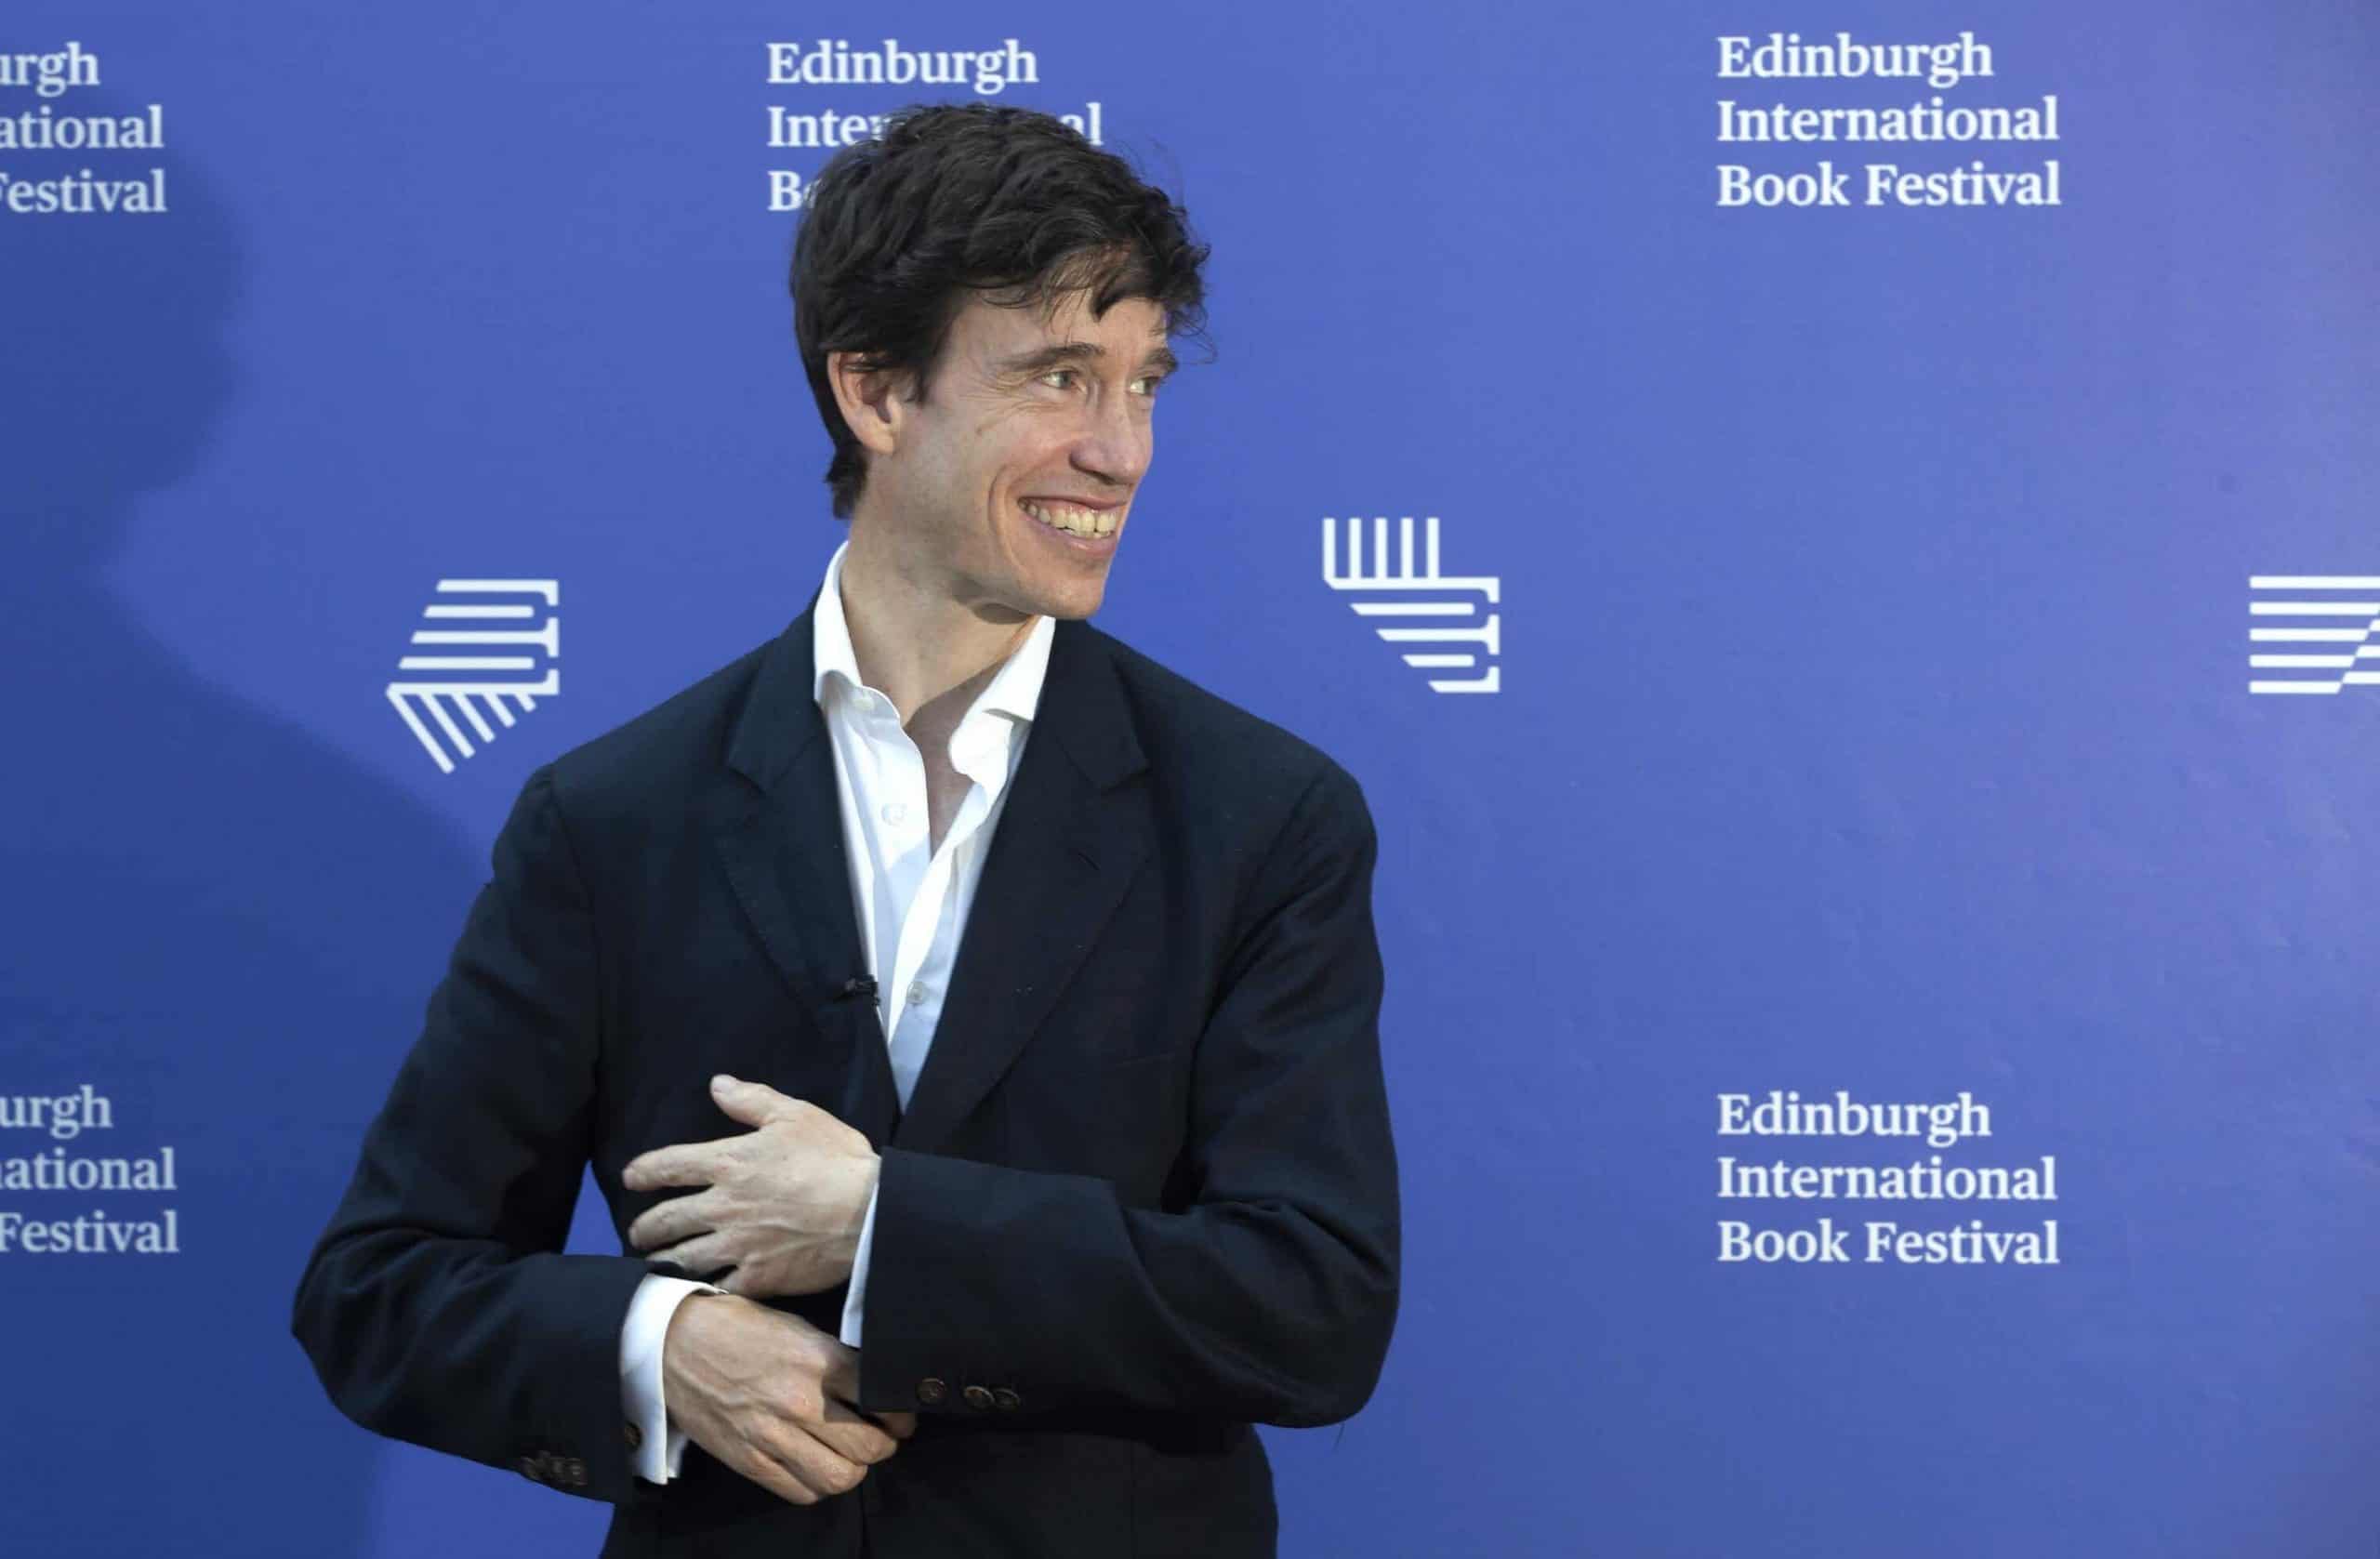 Hilarious: BBC accidently ran Rory Stewart April Fool’s Day prank